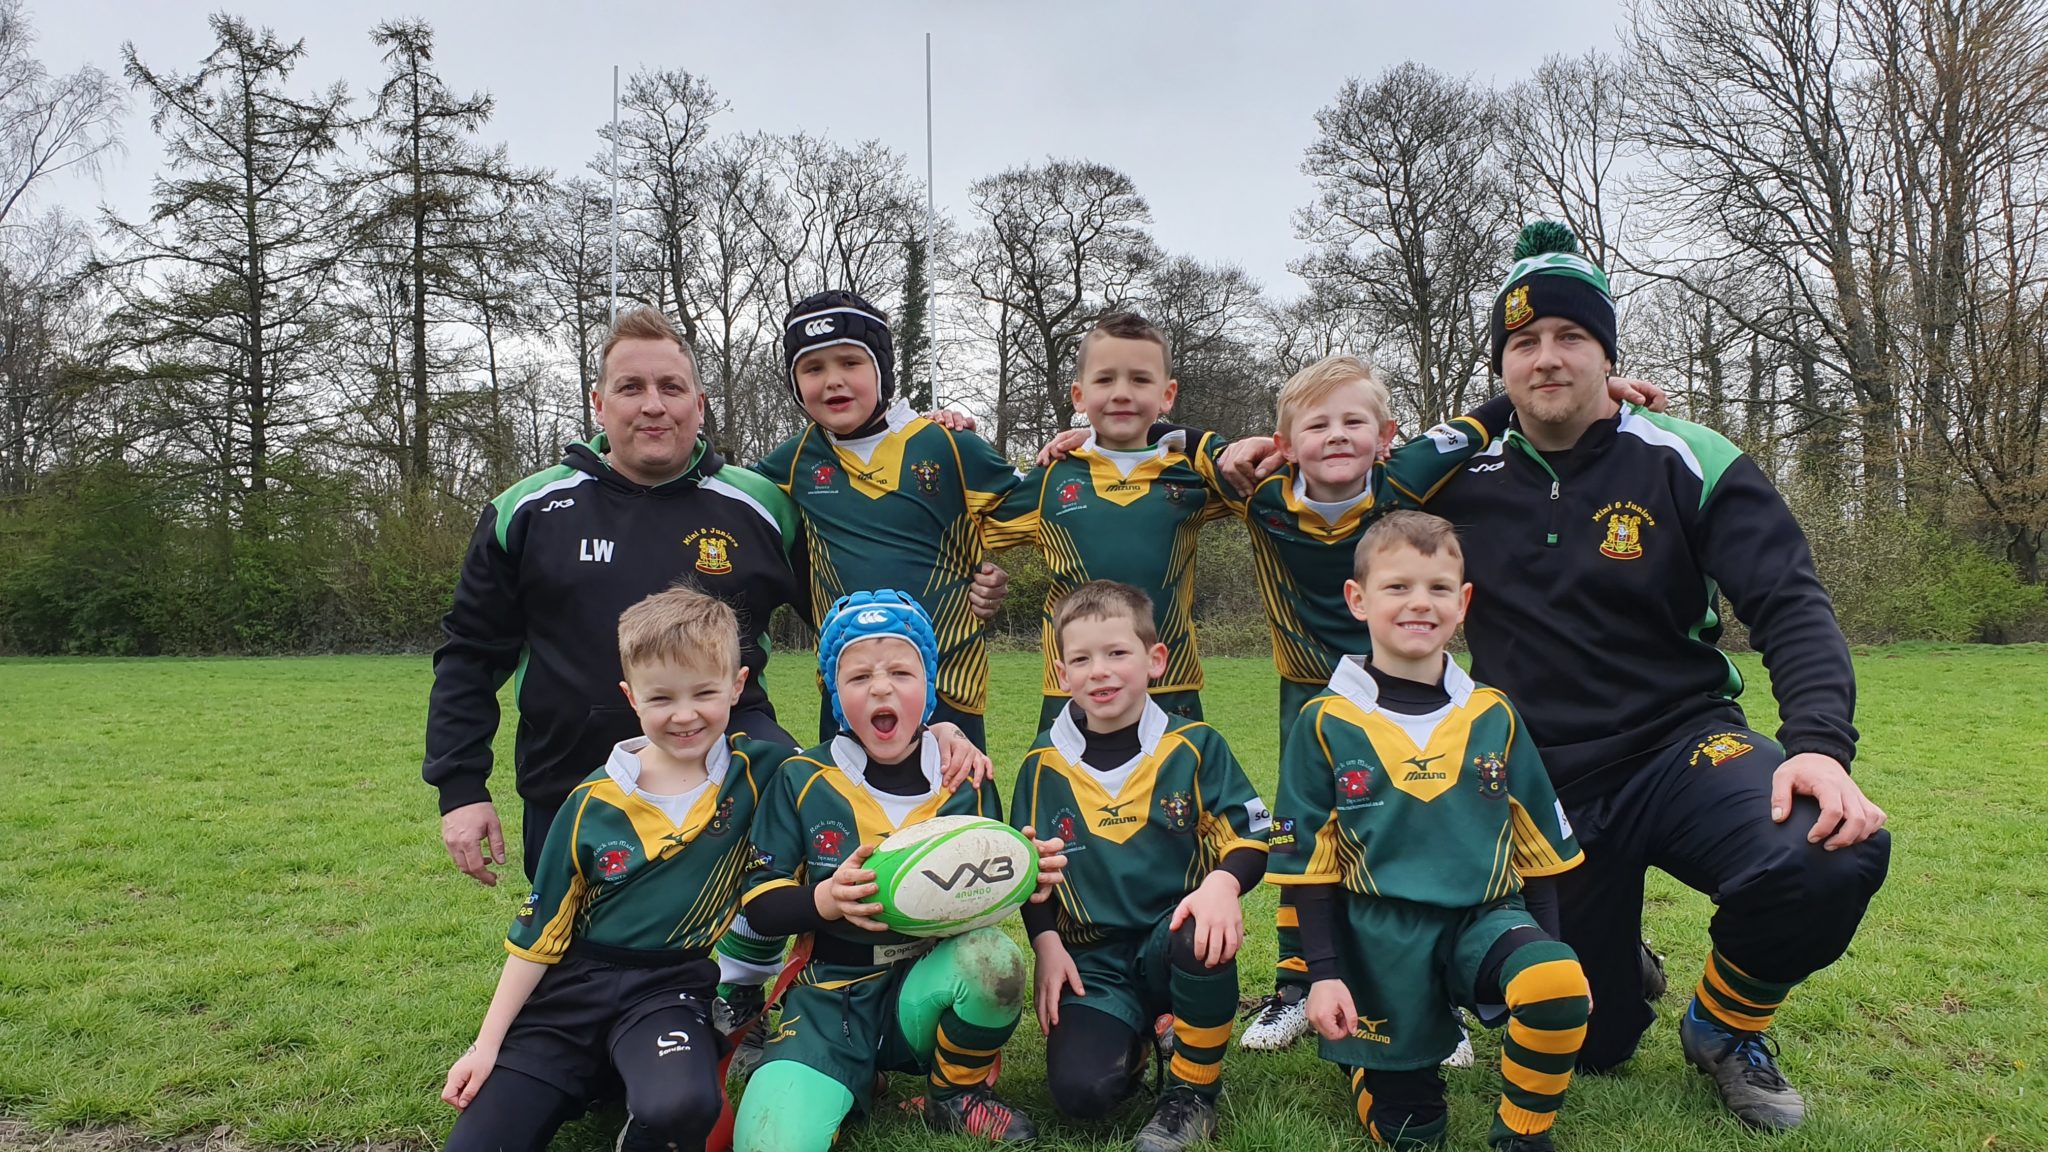 Girling rugby club's under 7s team